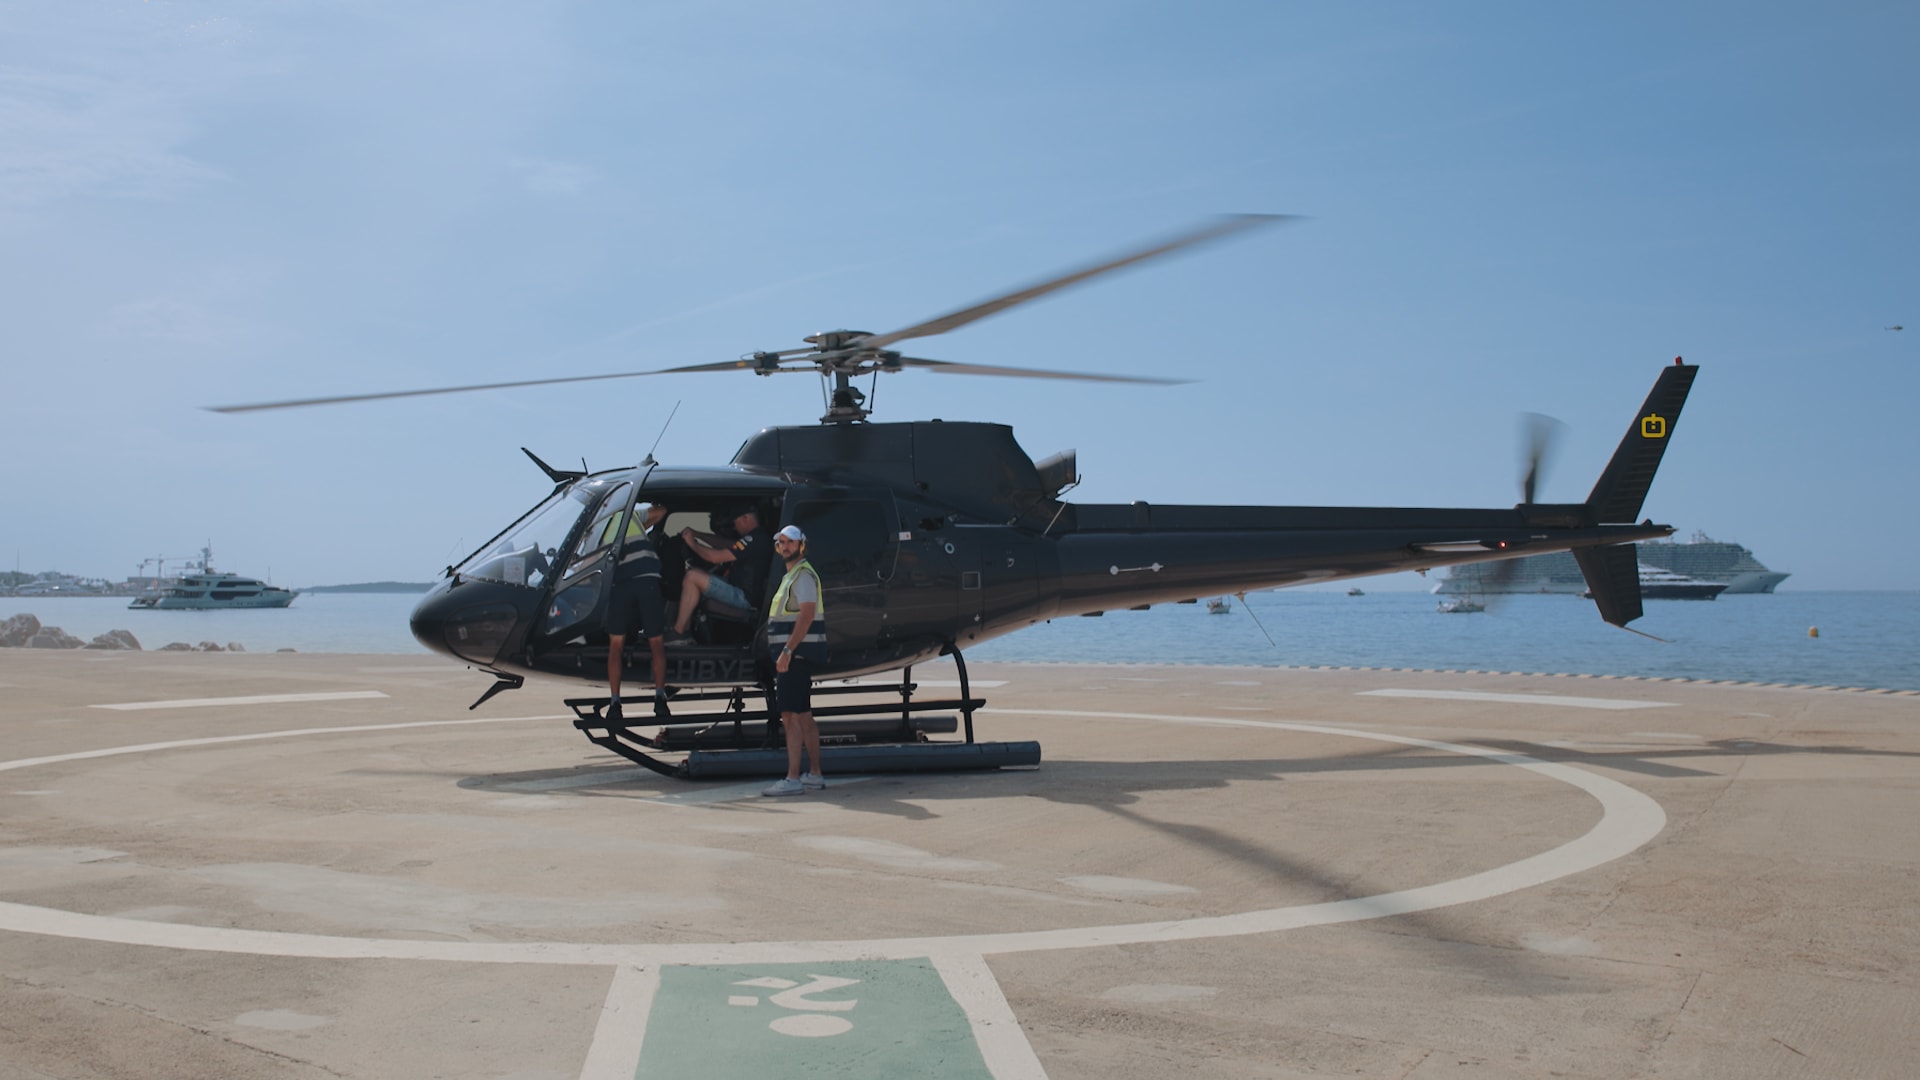 VIP helicopter from Global-Tickets